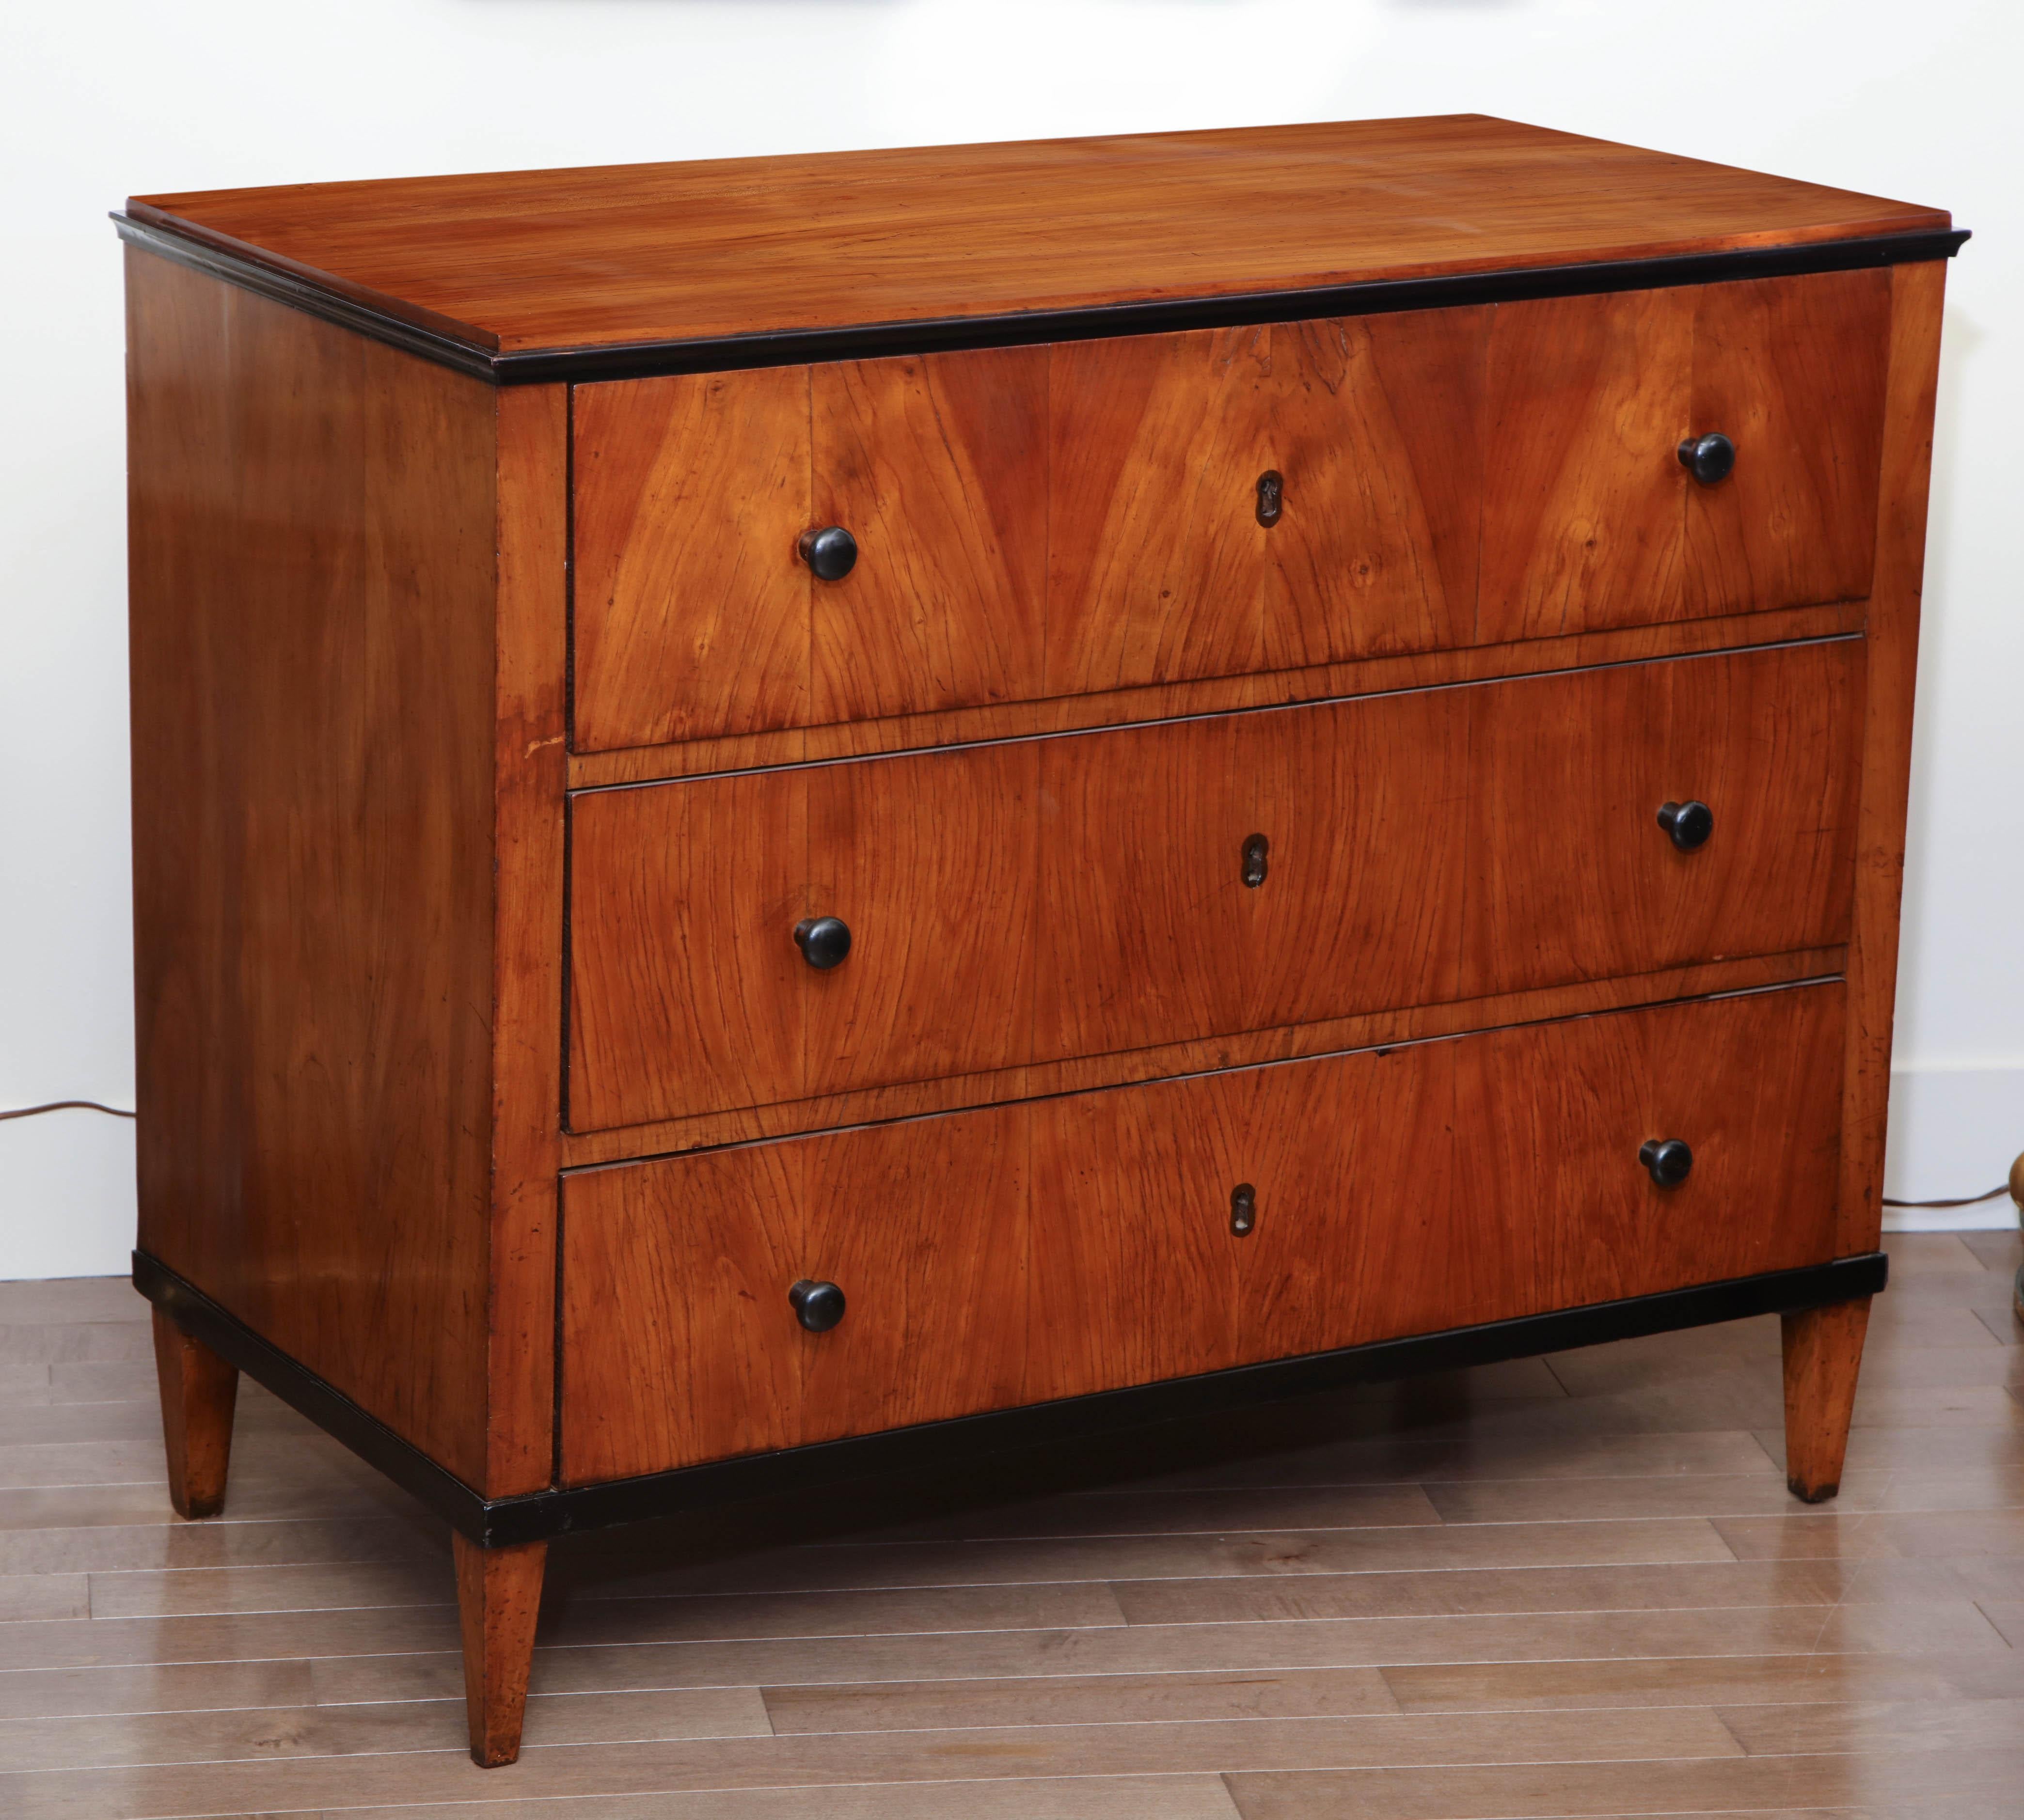 Superb early 19th century Austrian, fruitwood chest.
Top drawer with fitment.